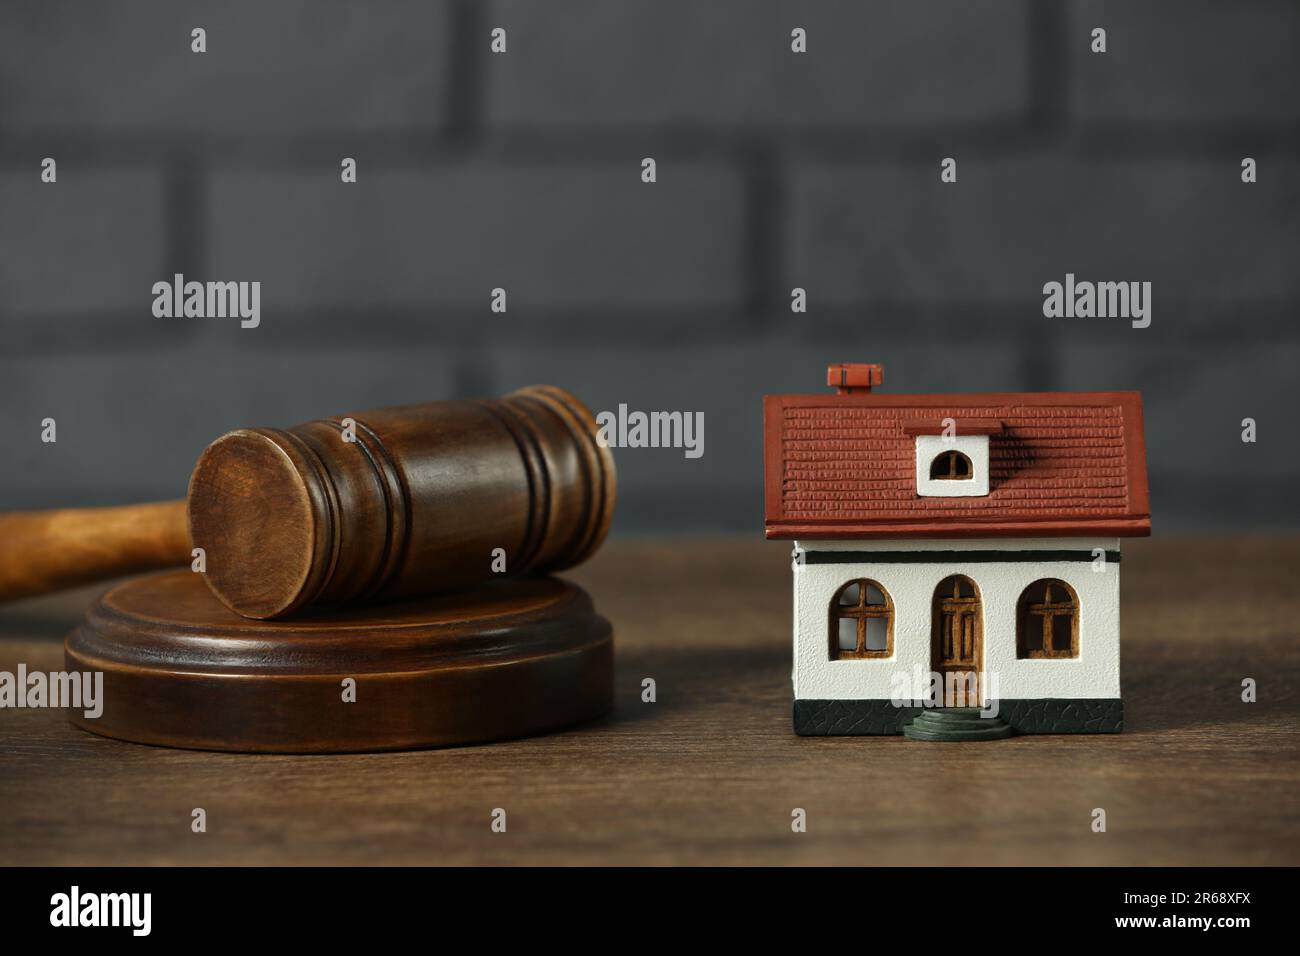 Construction and land law concepts. House model and gavel on wooden table, closeup Stock Photo